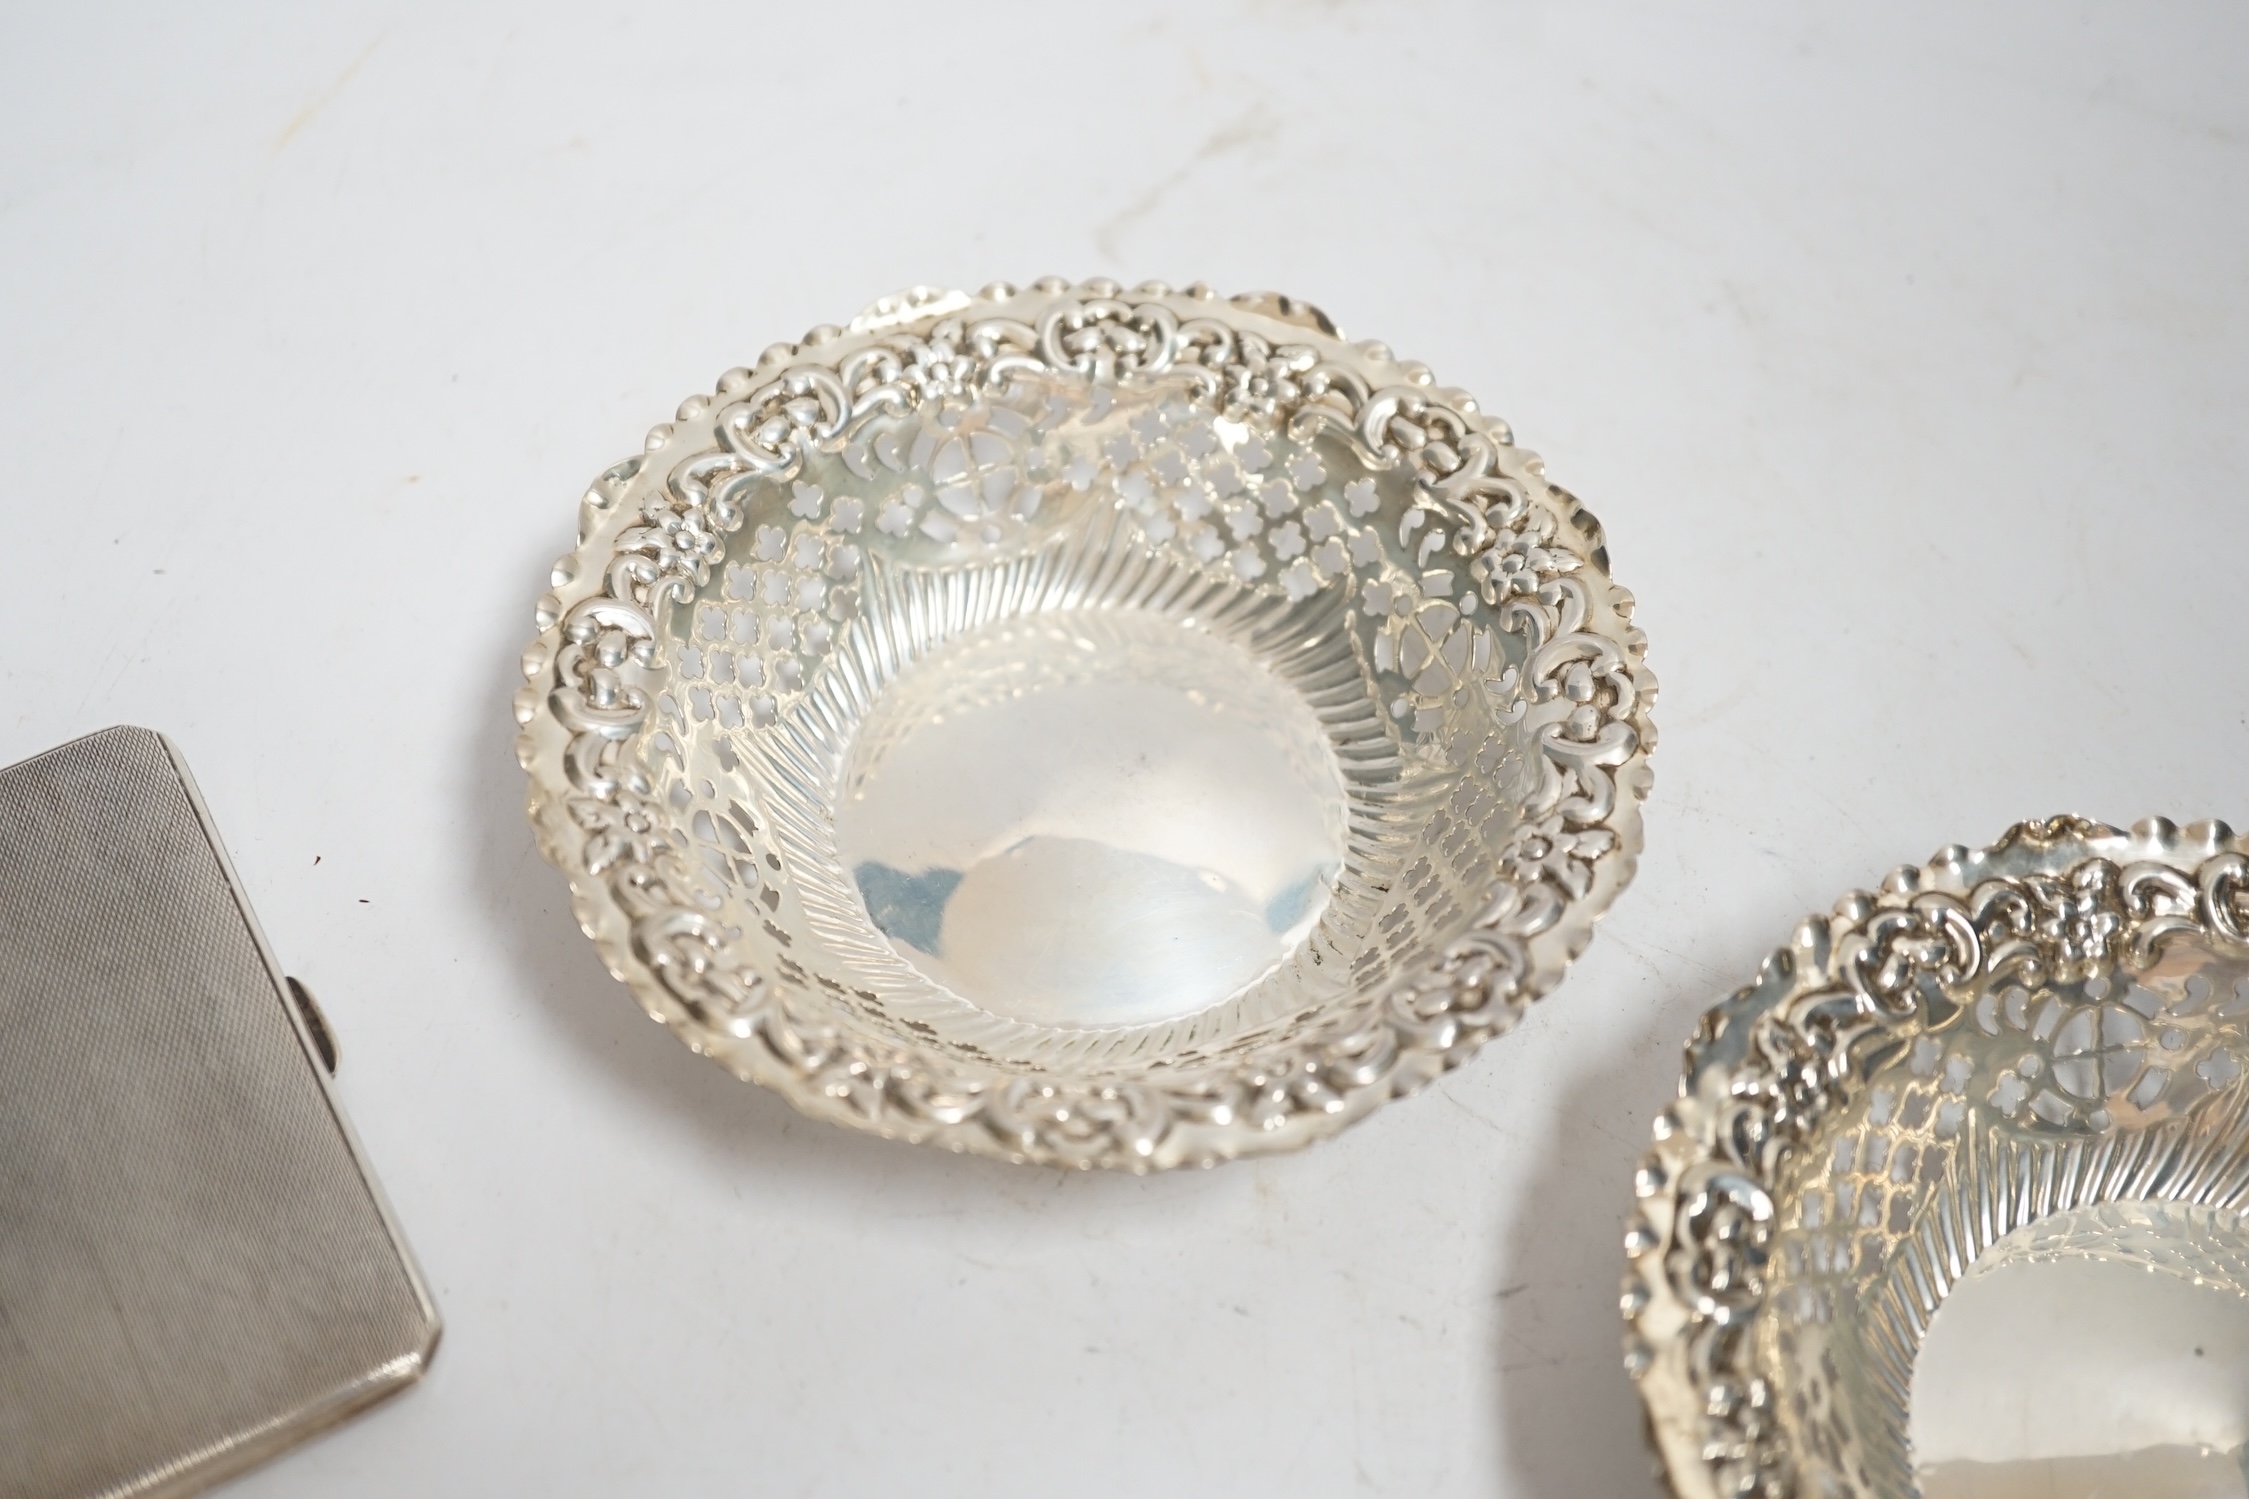 A pair of late Victorian pierced silver bonbon dishes, Birmingham, 1896, diameter 11.1cm, together with two silver cigarette cases.